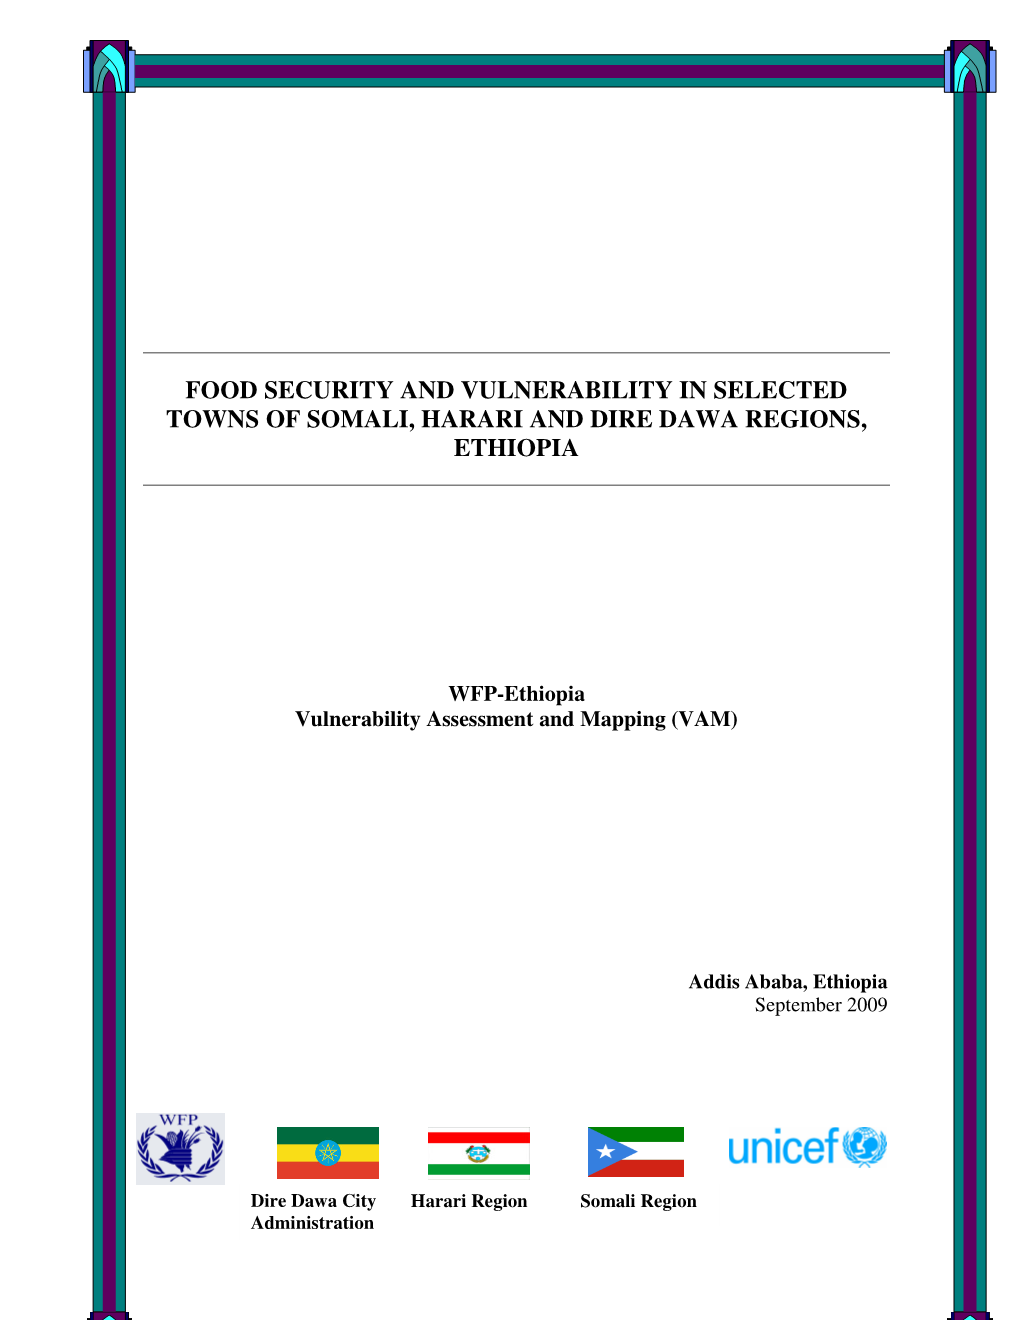 Food Security and Vulnerability in Selected Towns of Somali, Harari and Dire Dawa Regions, Ethiopia